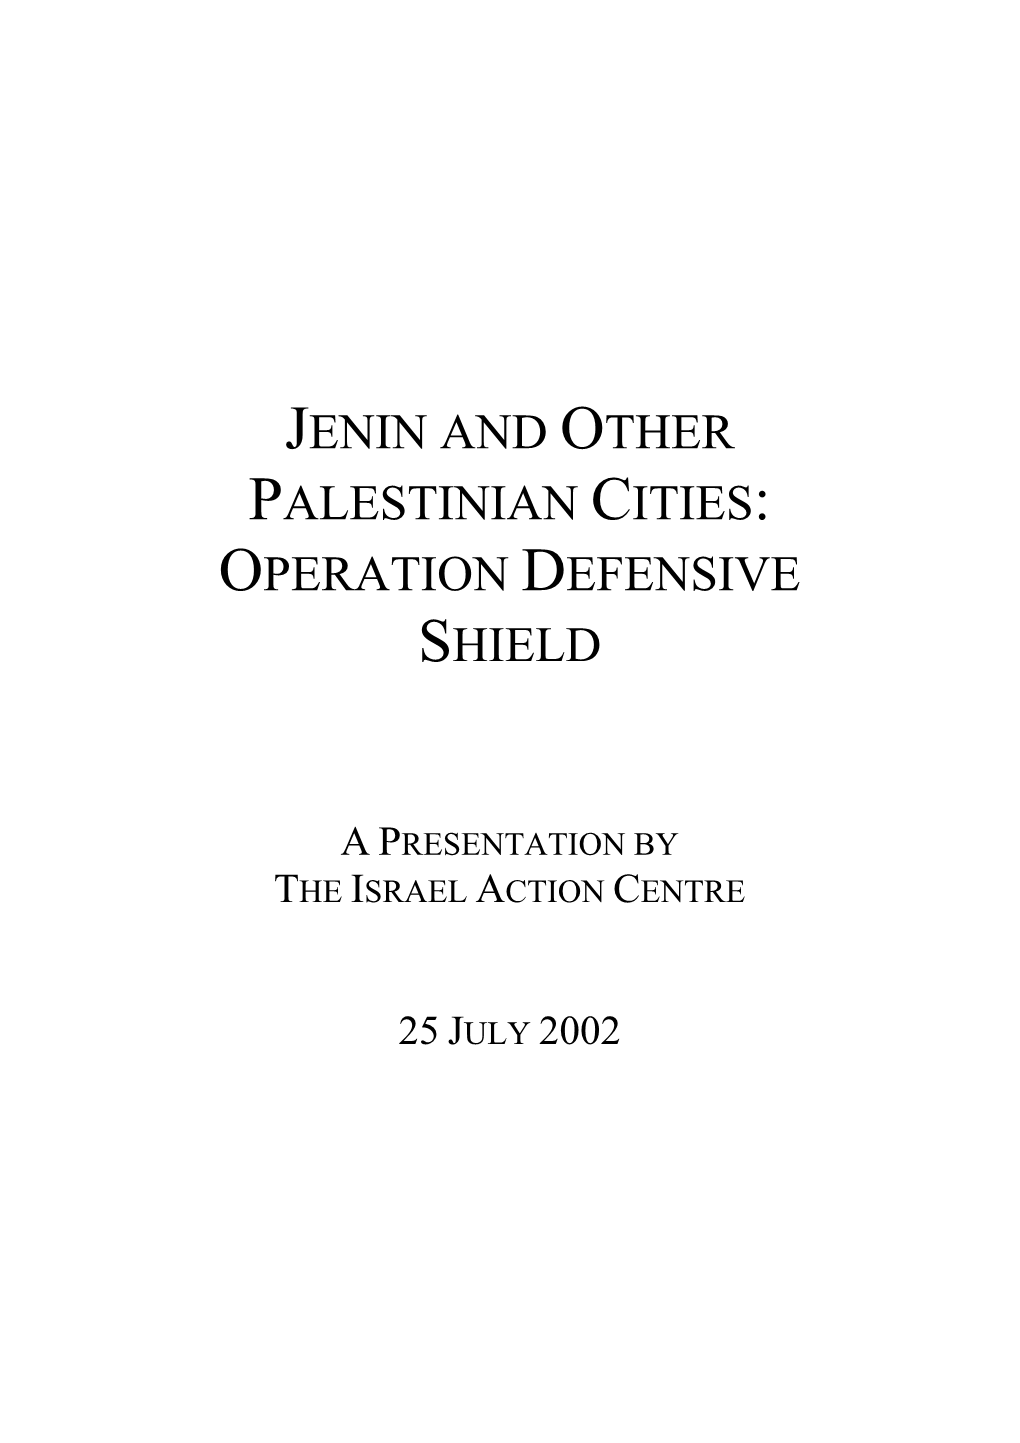 Jenin and Other Palestinian Cities: Operation Defensive Shield